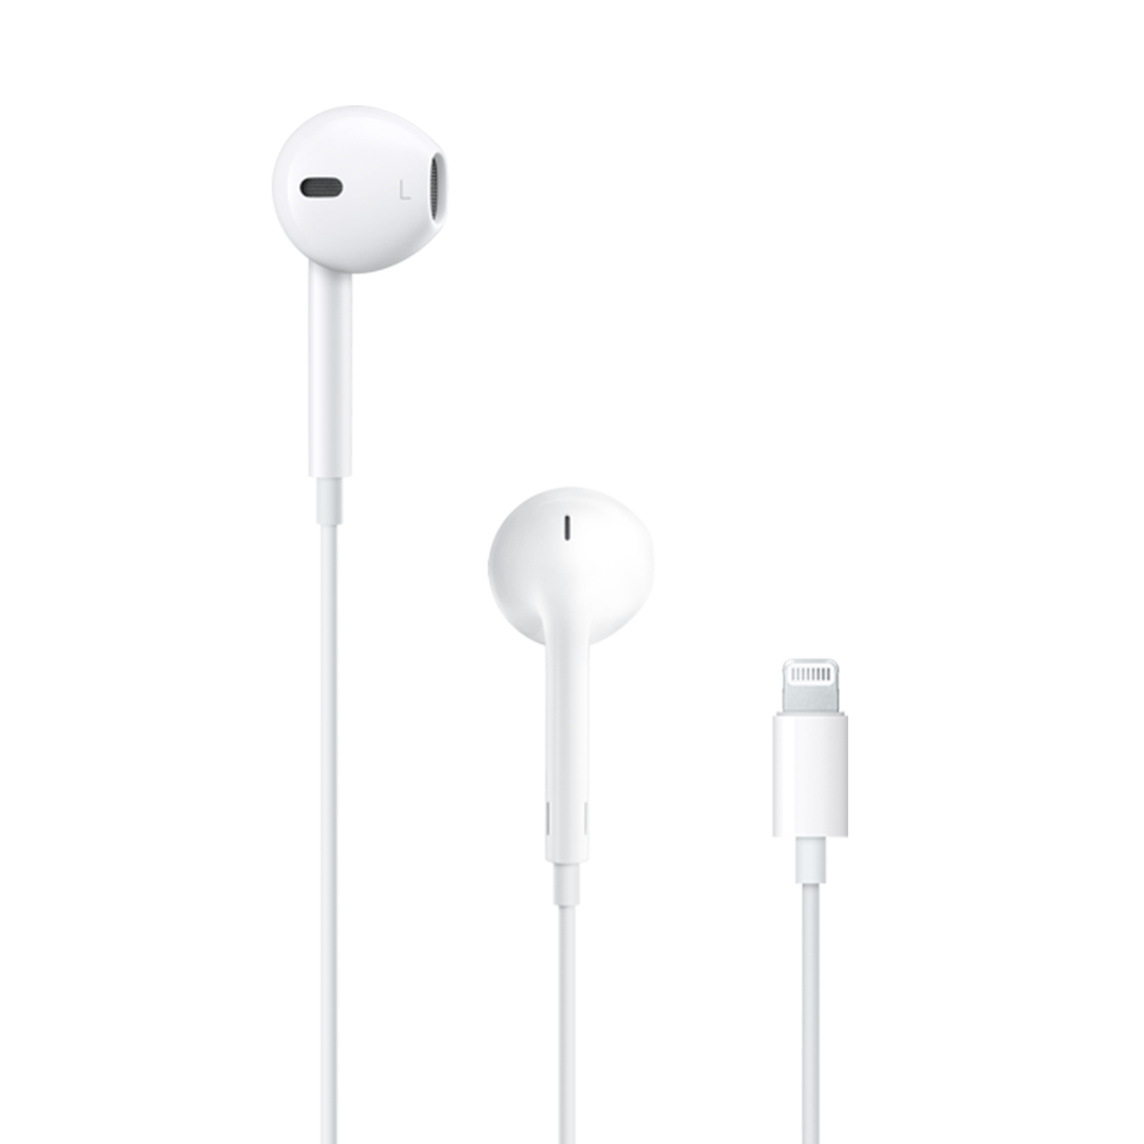 EarPods with Lightning Connector for iPhone